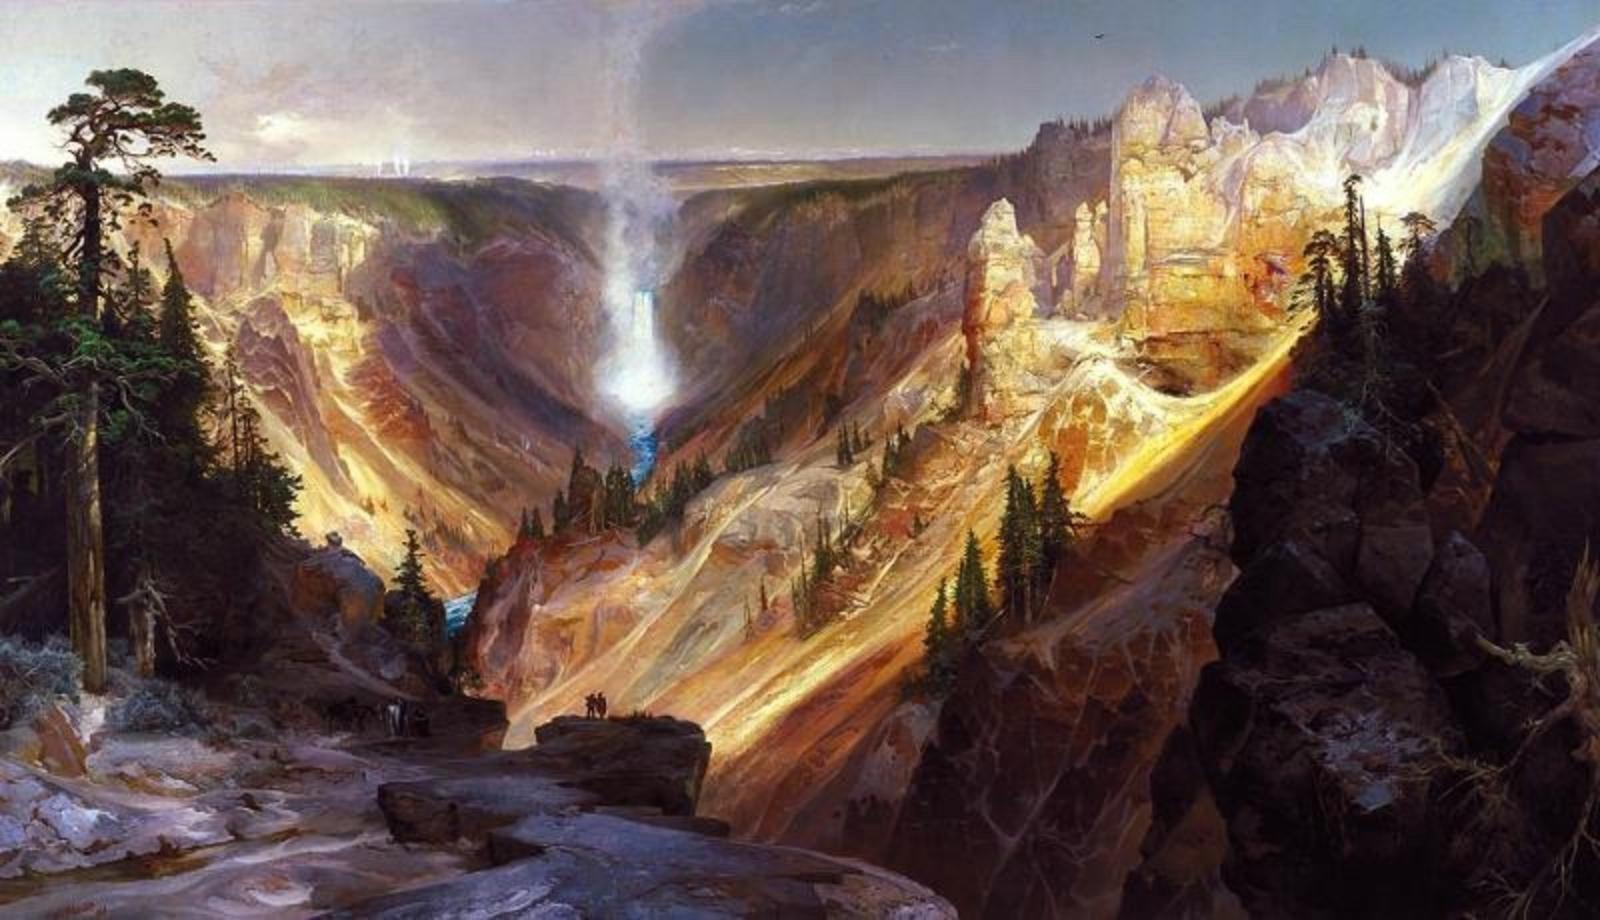 Thomas Moran's "Grand Canyon of the Yellowstone" unveiled before Congress in 1872.